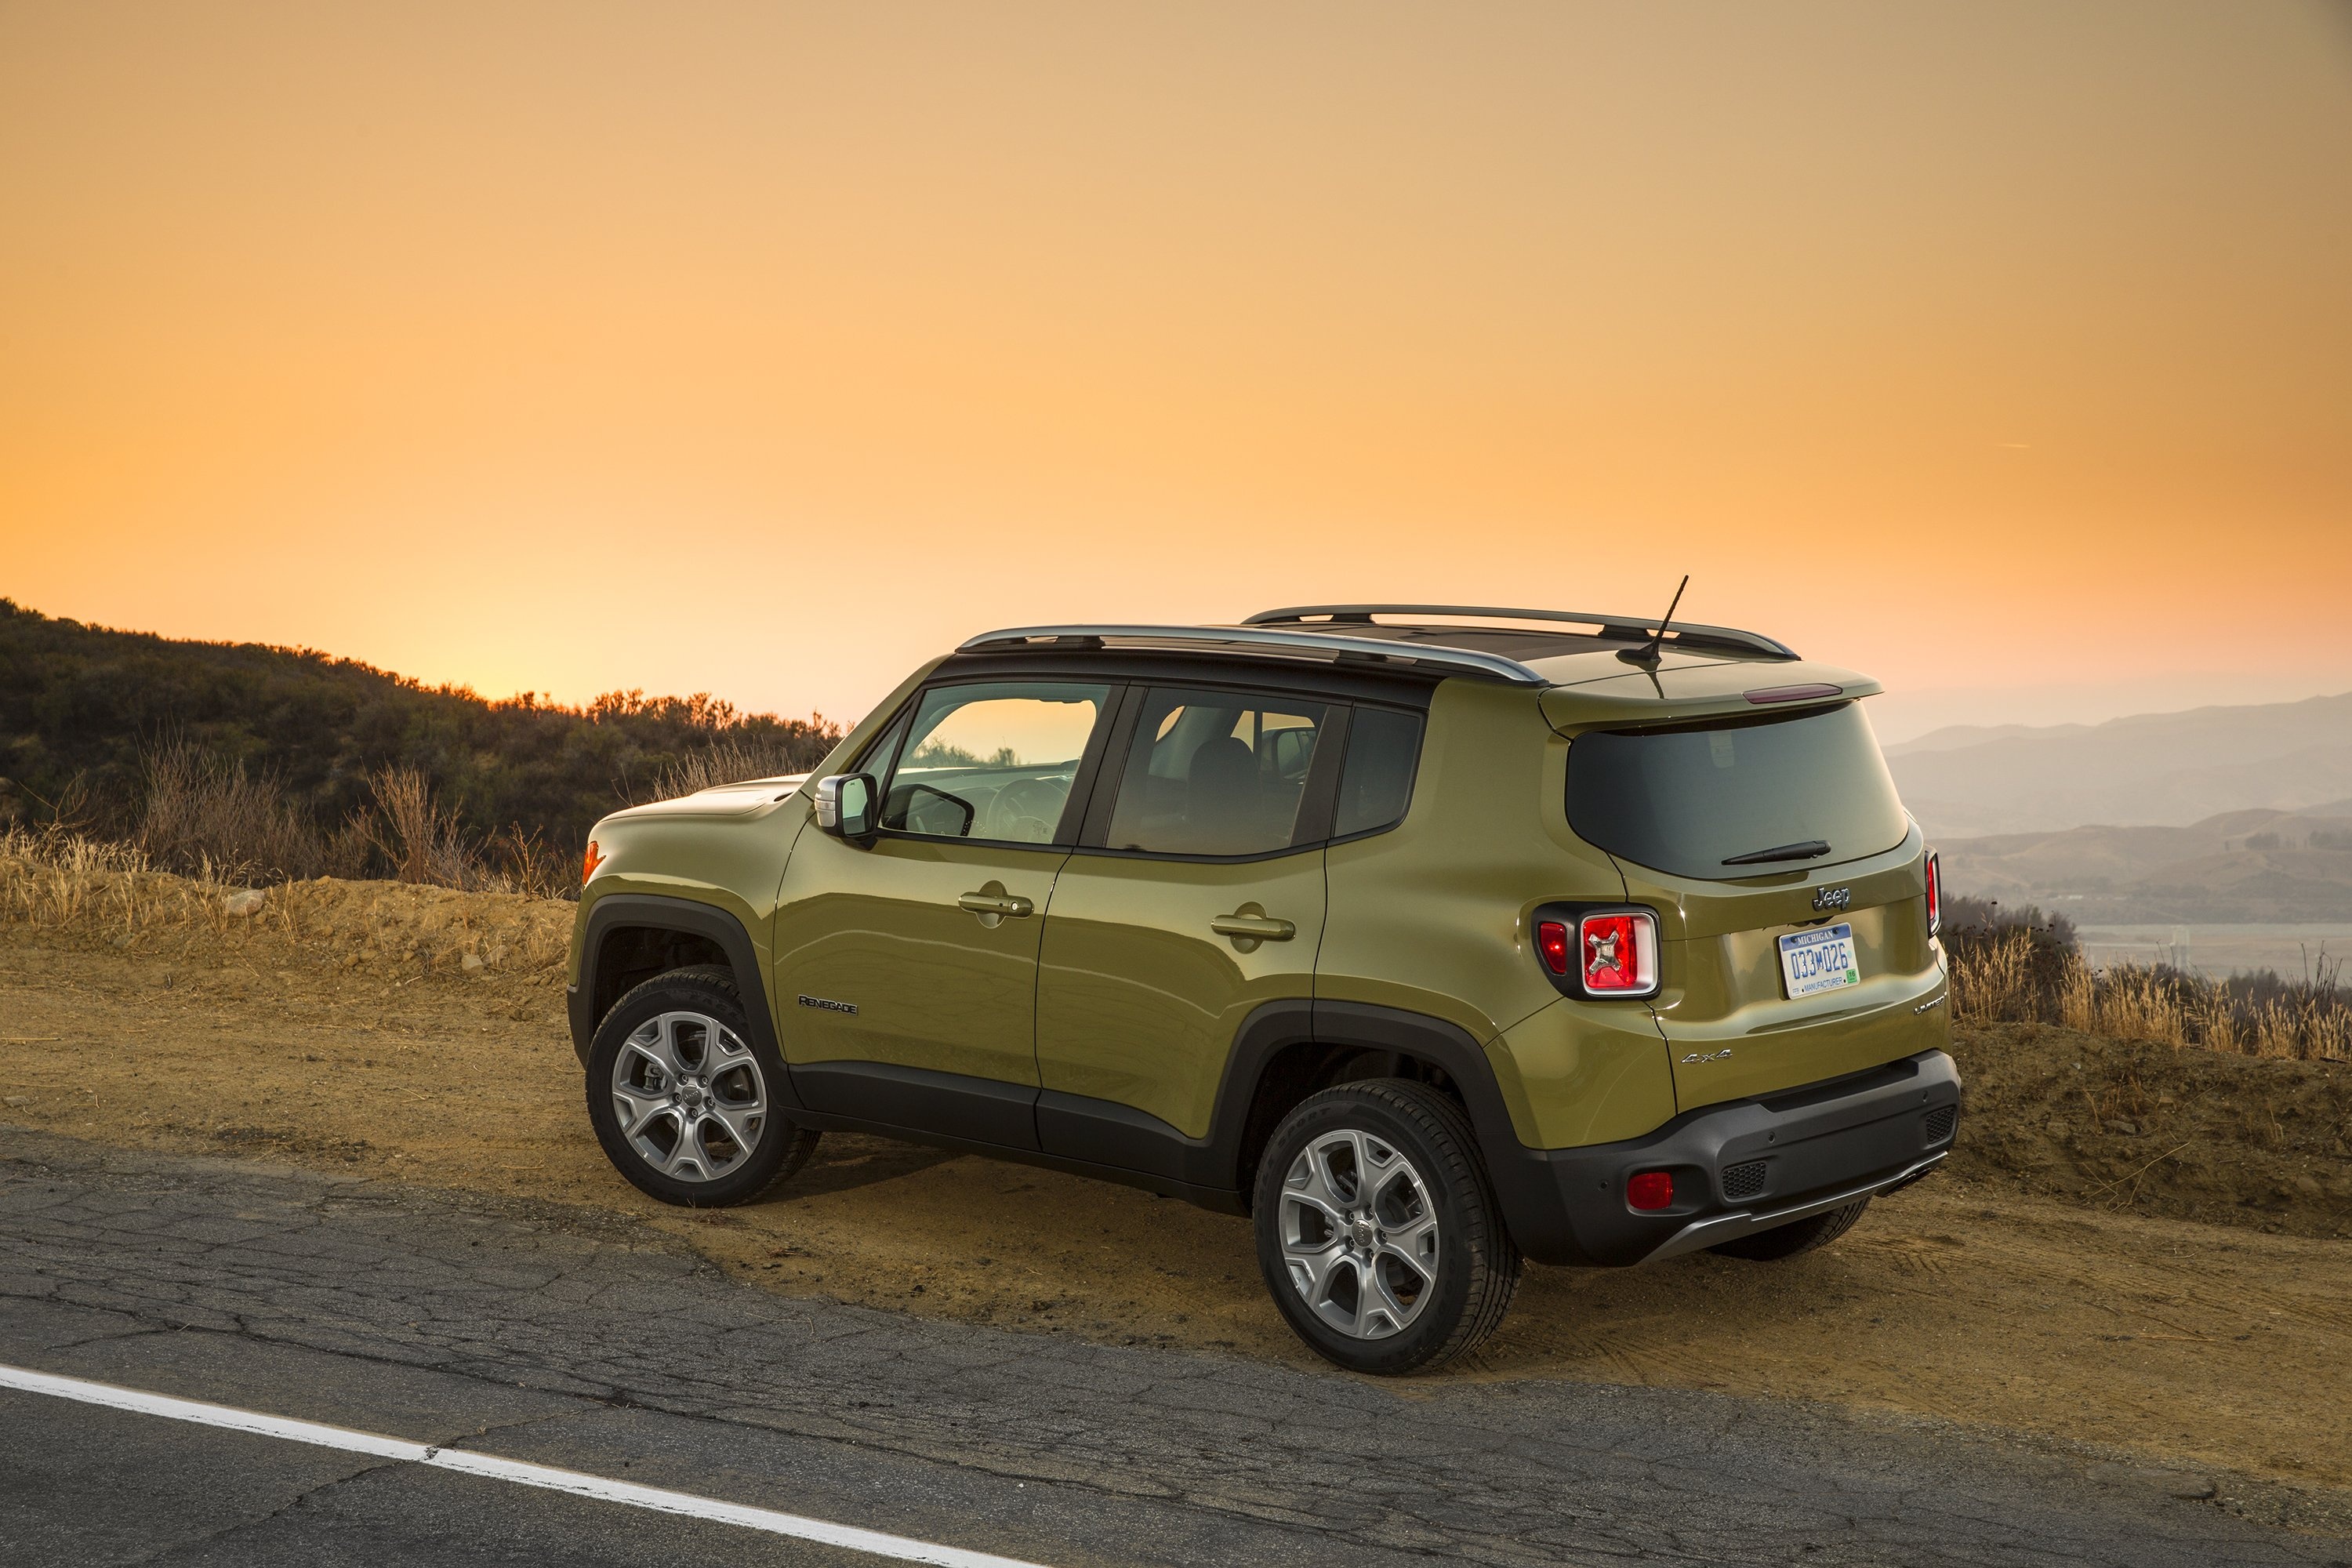 Jeep Renegade, Auto industry, Limited SUV, 4x4 capability, 3000x2000 HD Desktop